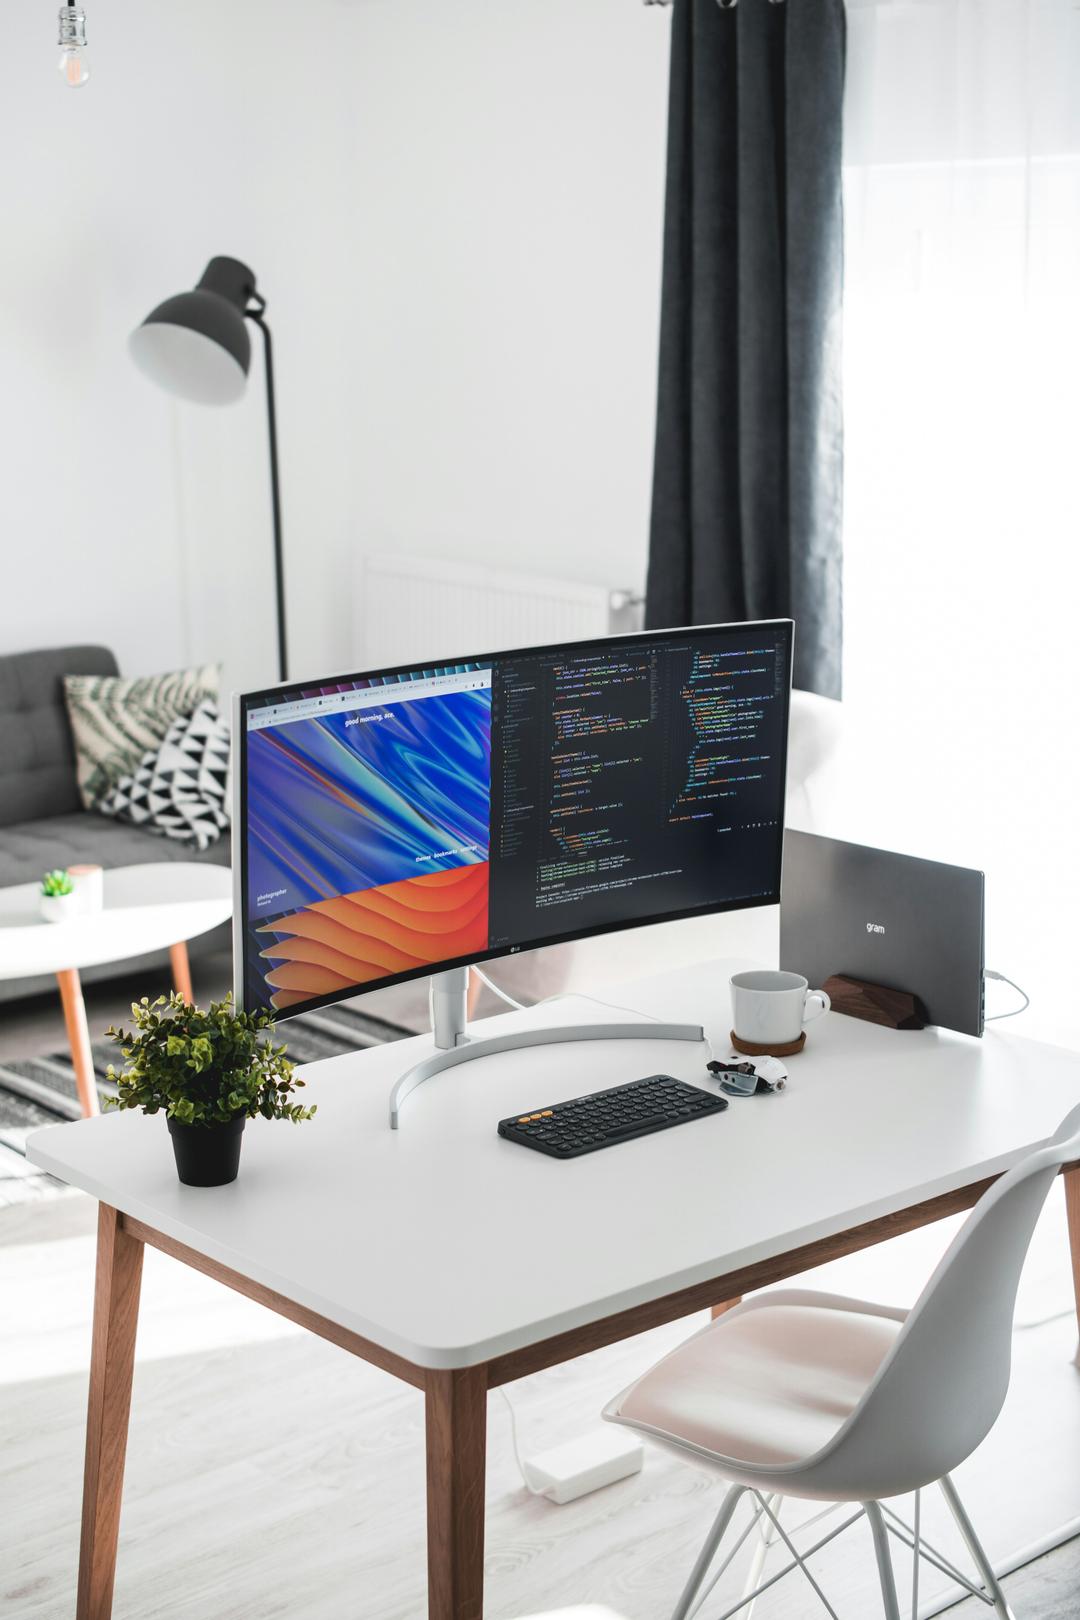 The ViewSonic VP2785-4K is a 27-inch 4K monitor with a 3840 x 2160 resolution, 60Hz refresh rate, and a wide viewing angle of 178 degrees. It has excellent color accuracy and is ideal for video editors and graphic designers.